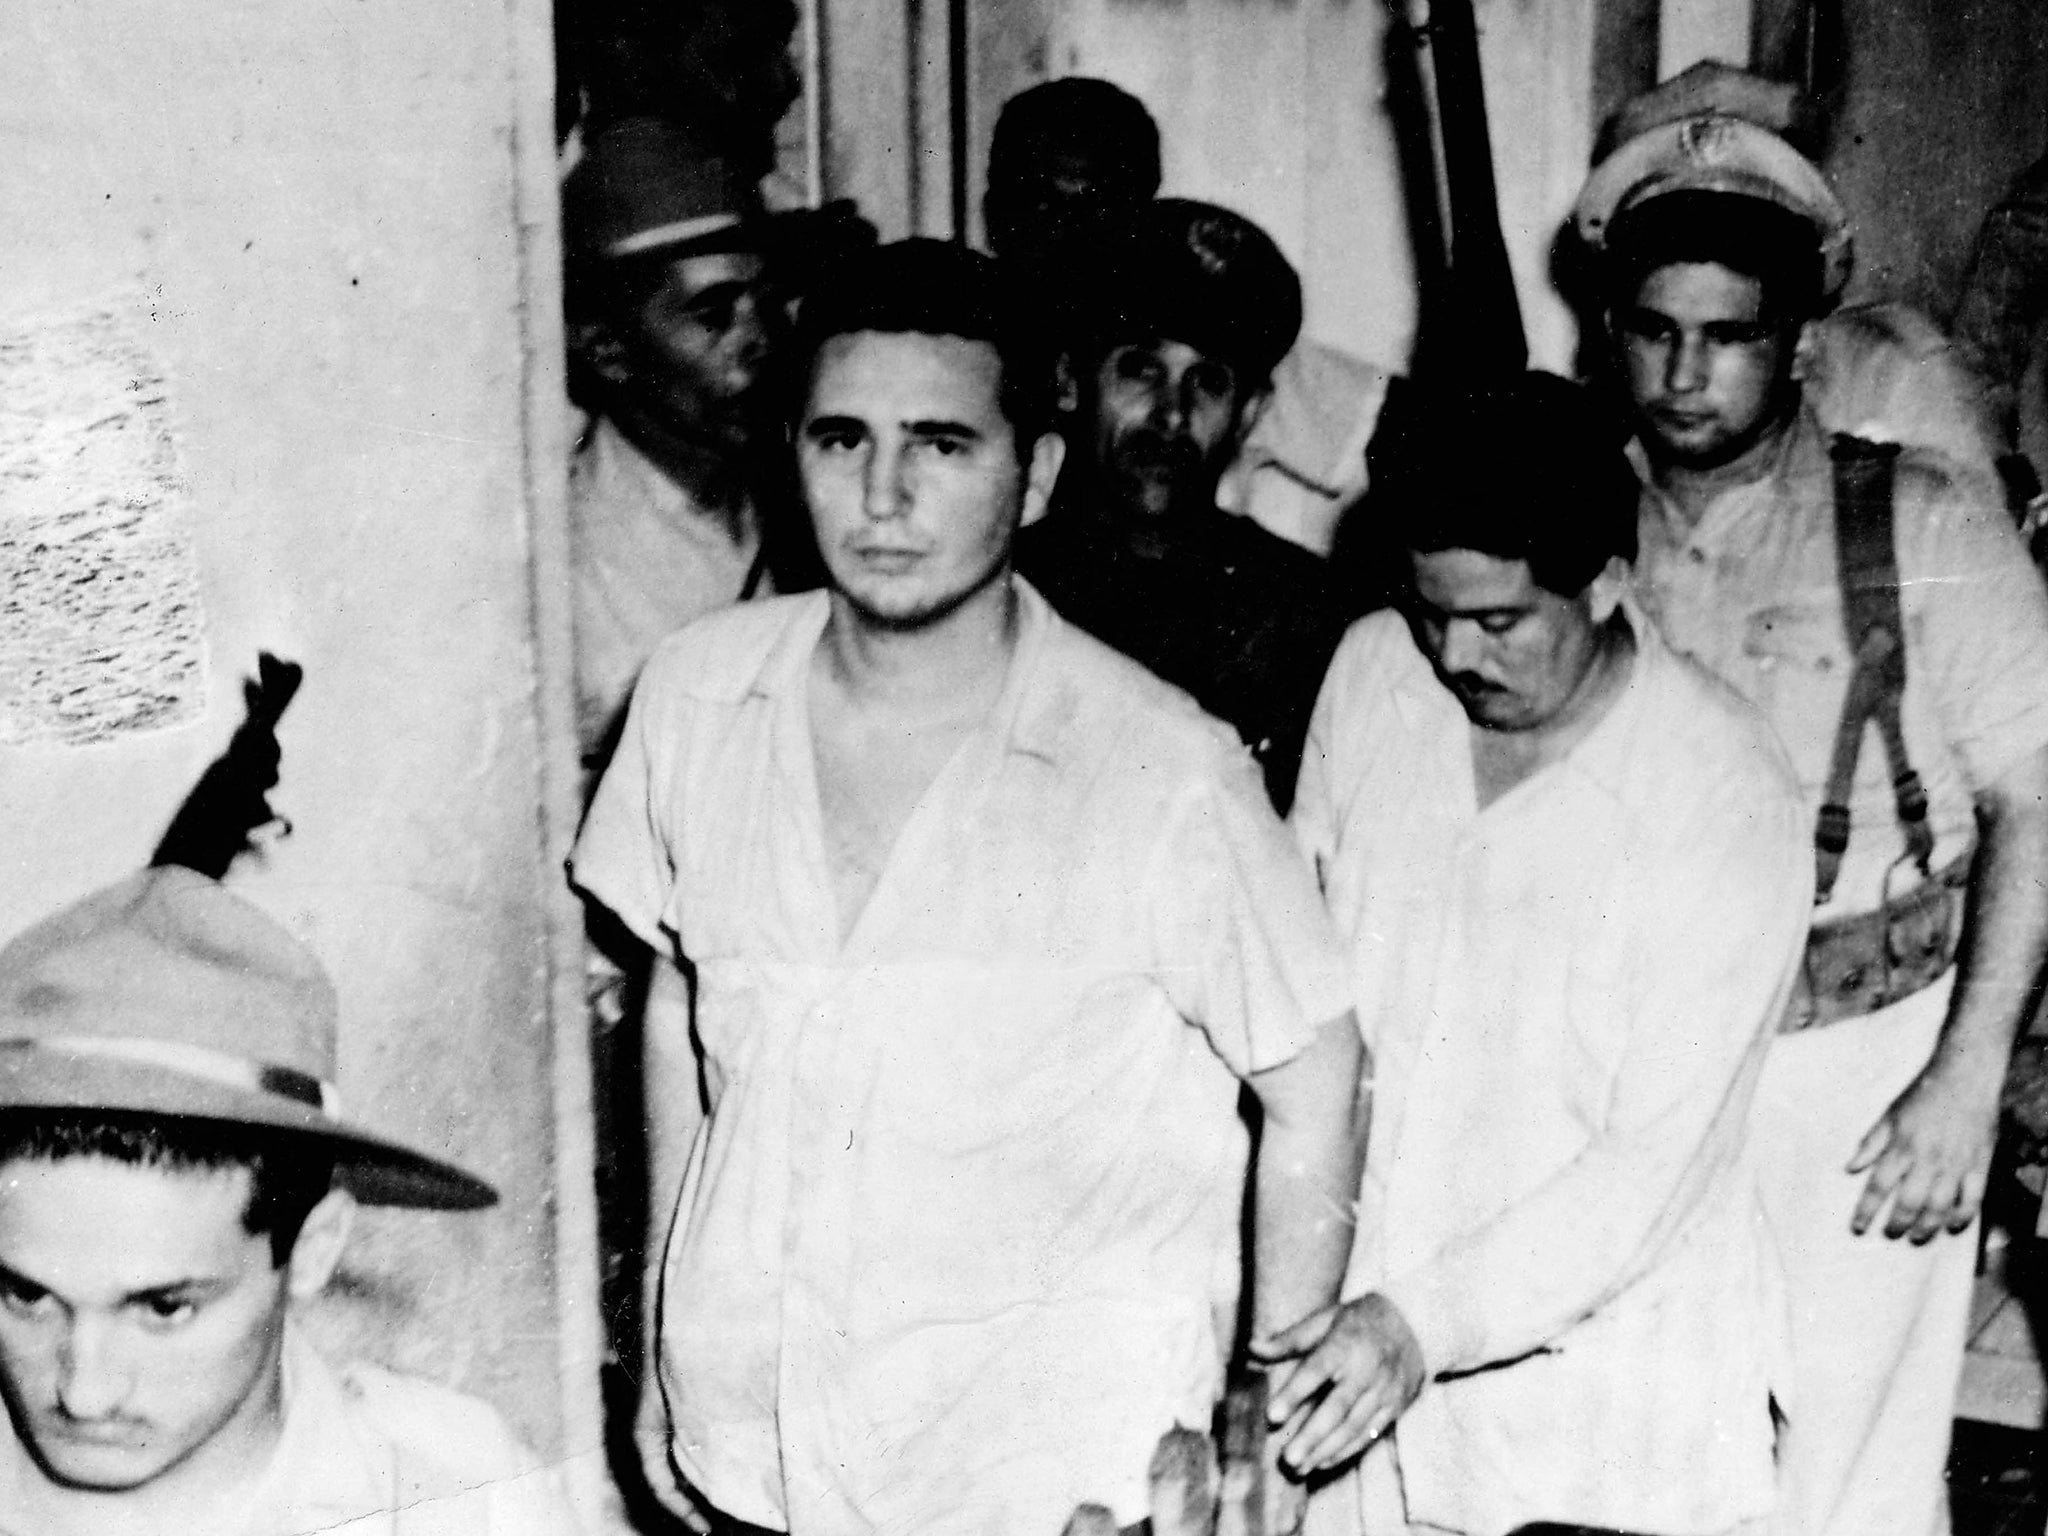 Castro being released from jail in 1955